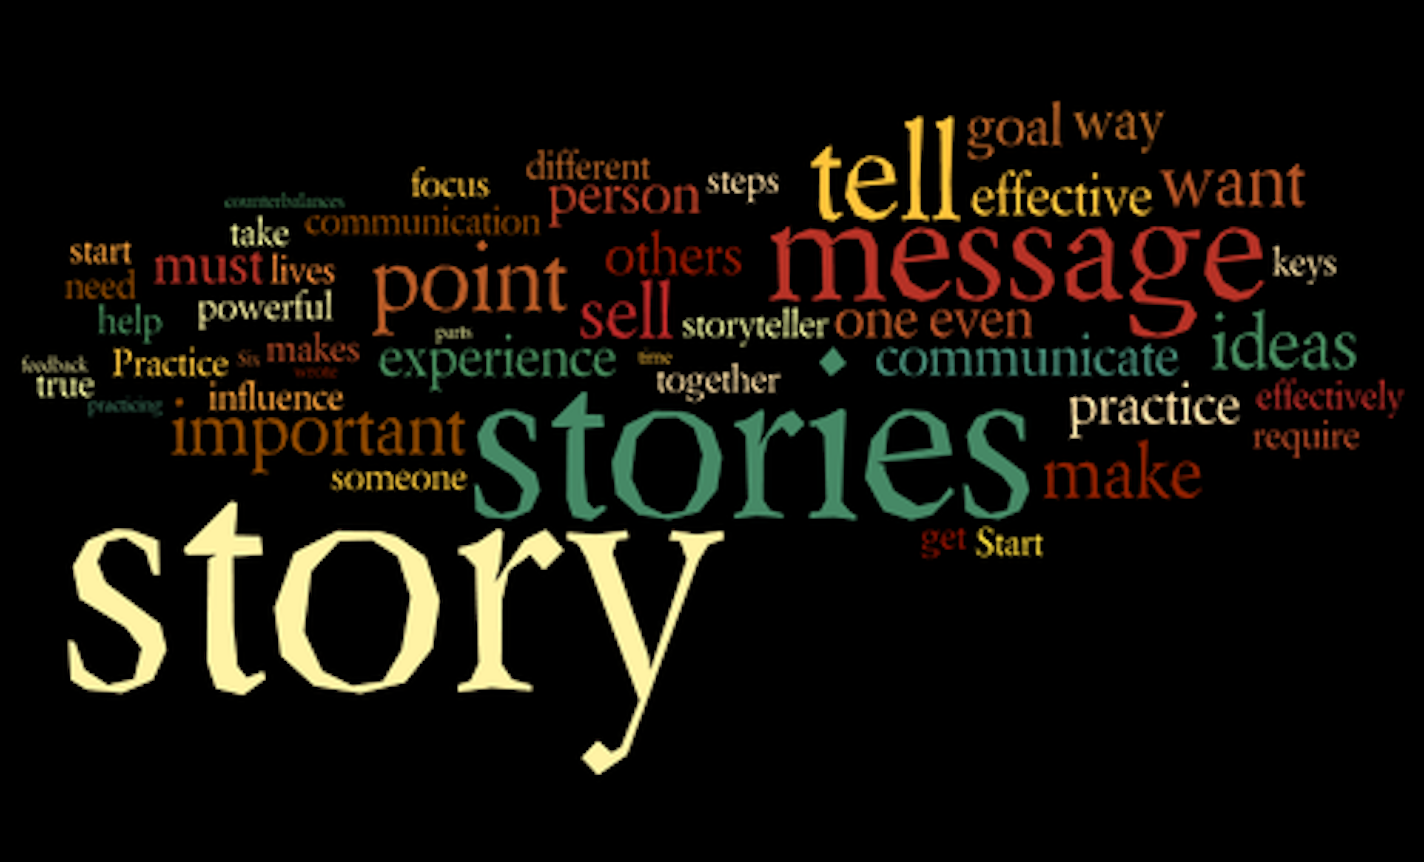 Sharing Stories:  A Facilitated Group Discussion